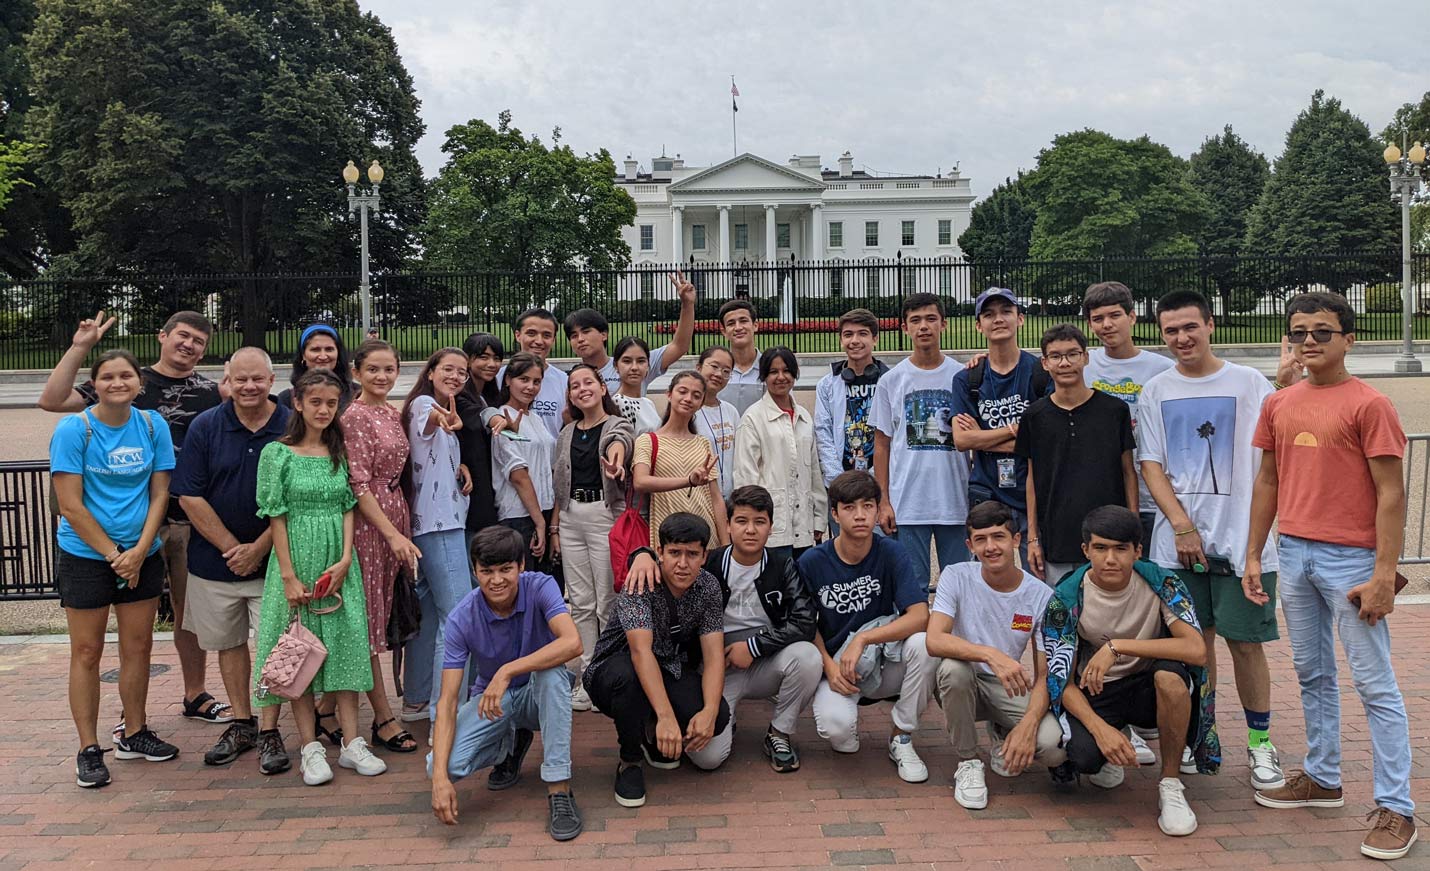 summer access camp group in front of White House